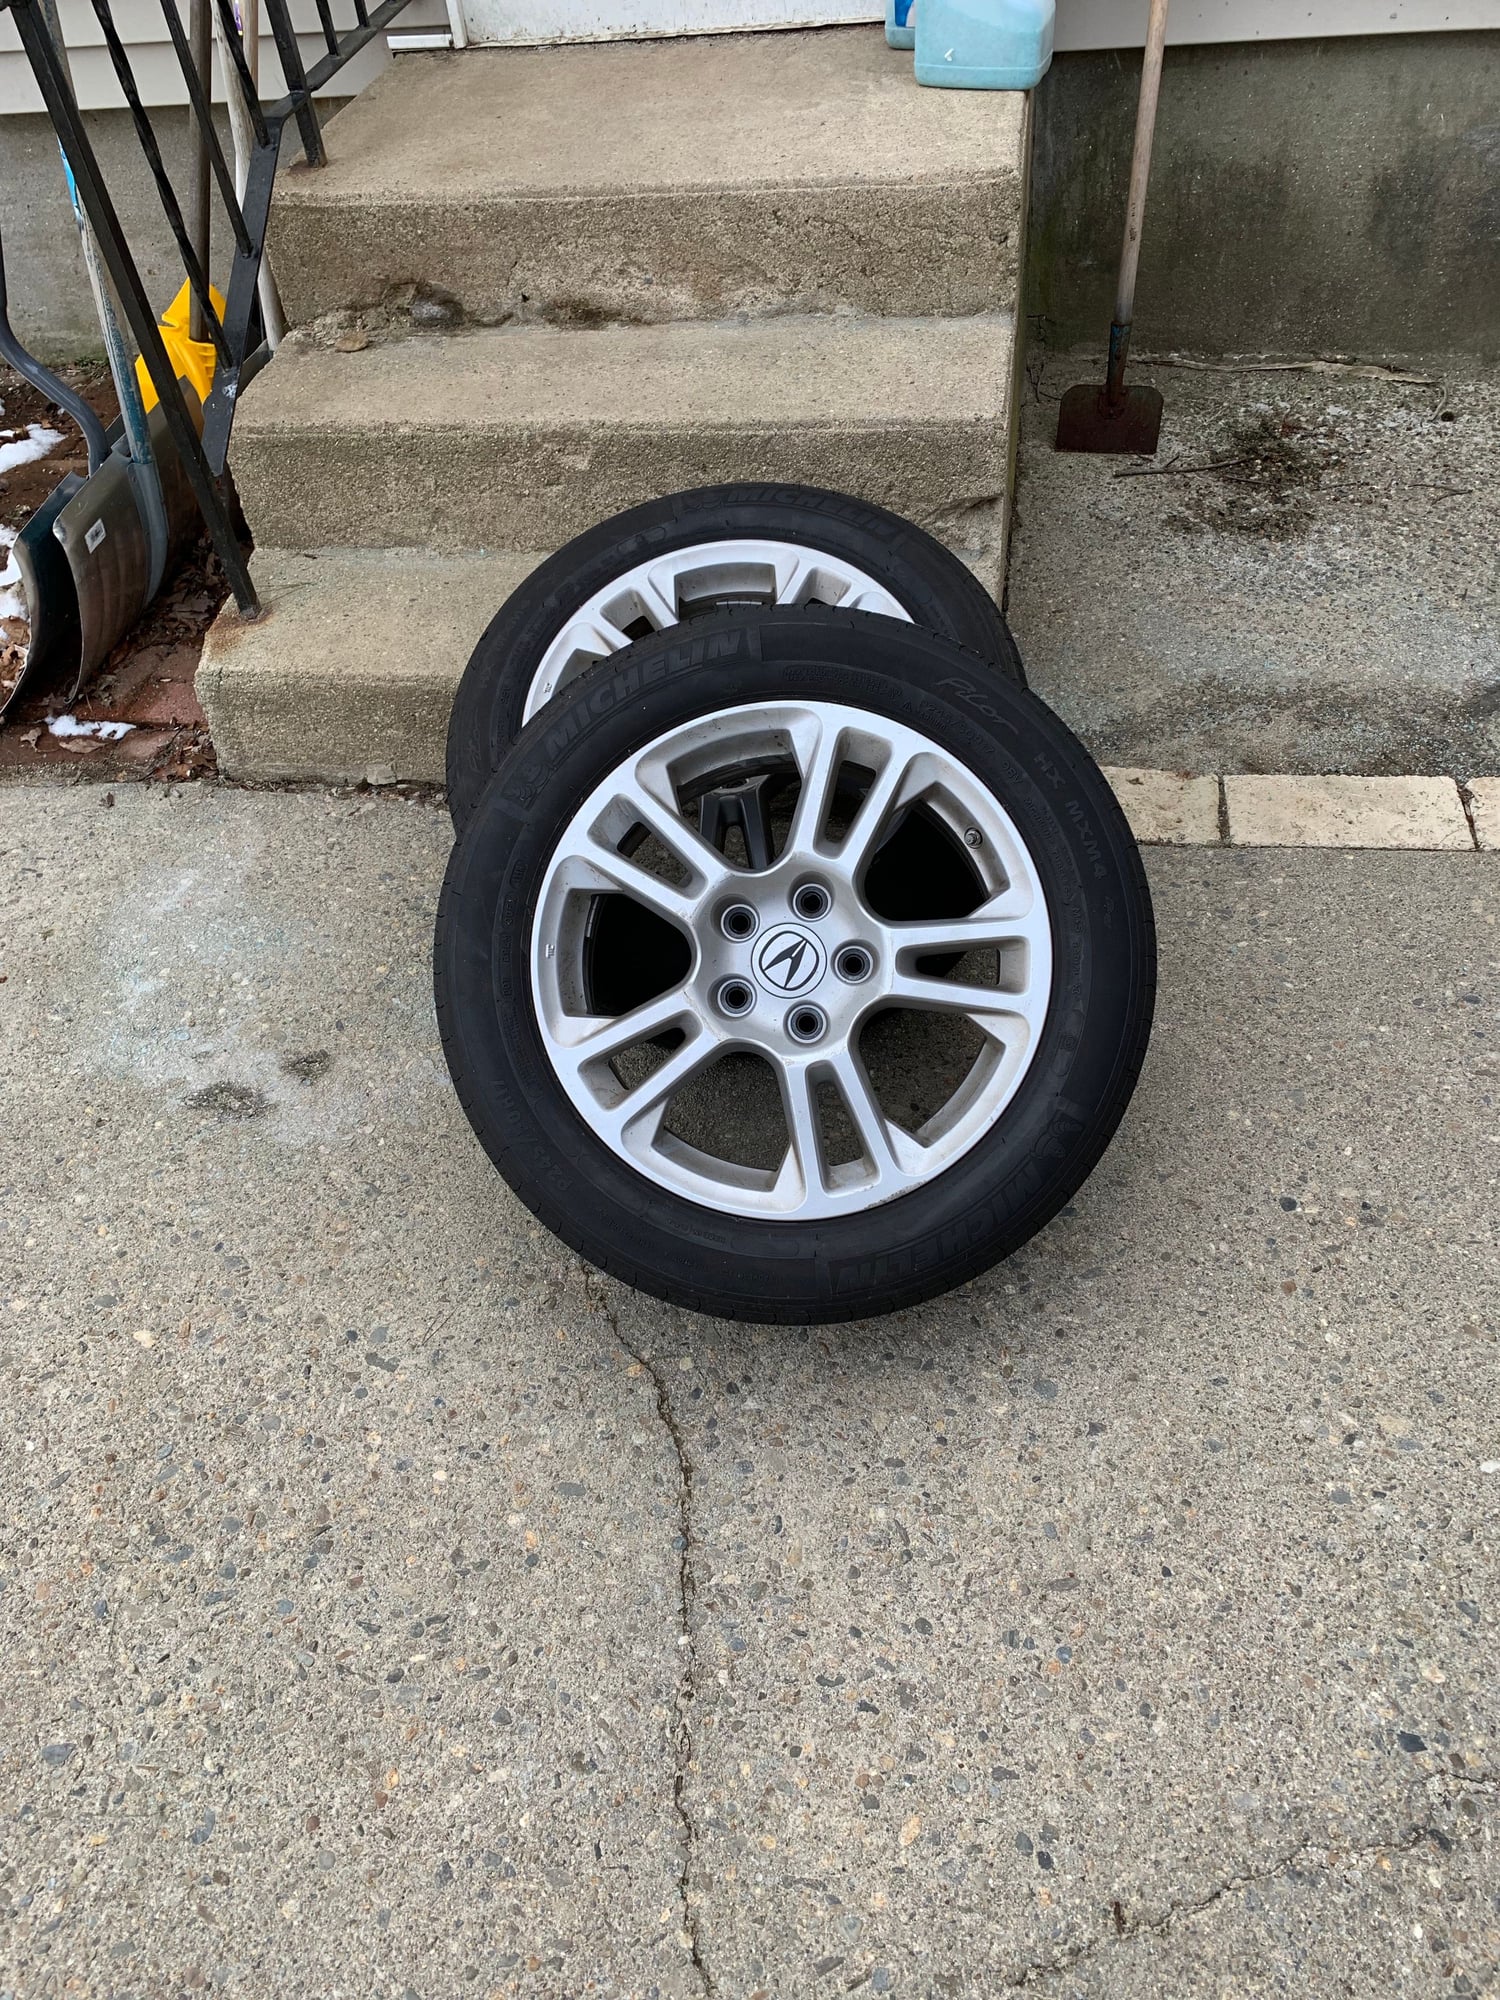 Wheels and Tires/Axles - FS: Two (2) 2010 Tl wheels & Michelin tires 5X120 - Used - 2010 Acura TL - Southbridge, MA 01550, United States